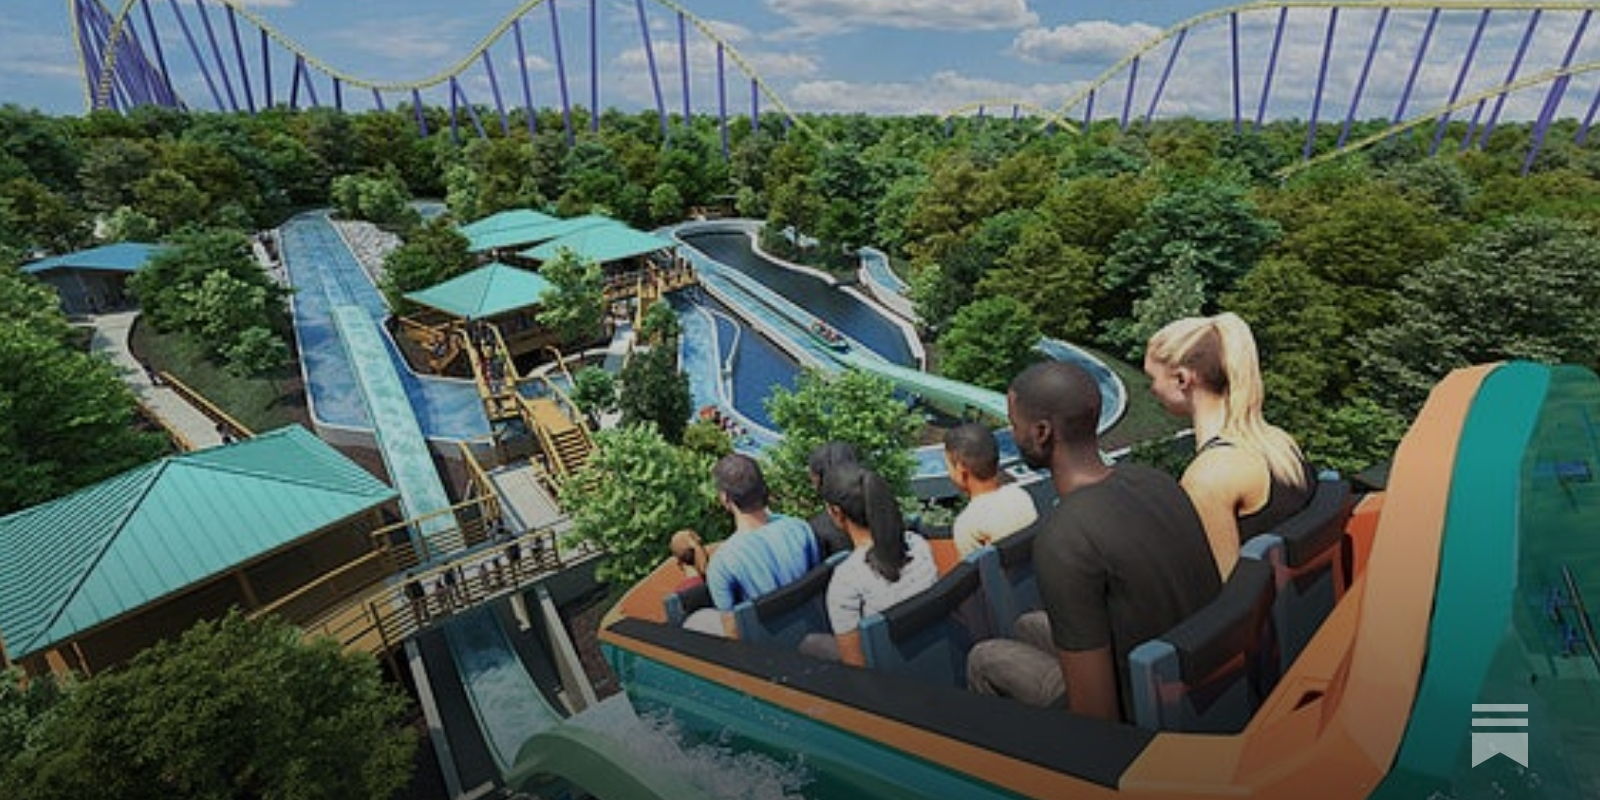 SeaWorld takes a stand with 2023 coaster - by Arthur Levine